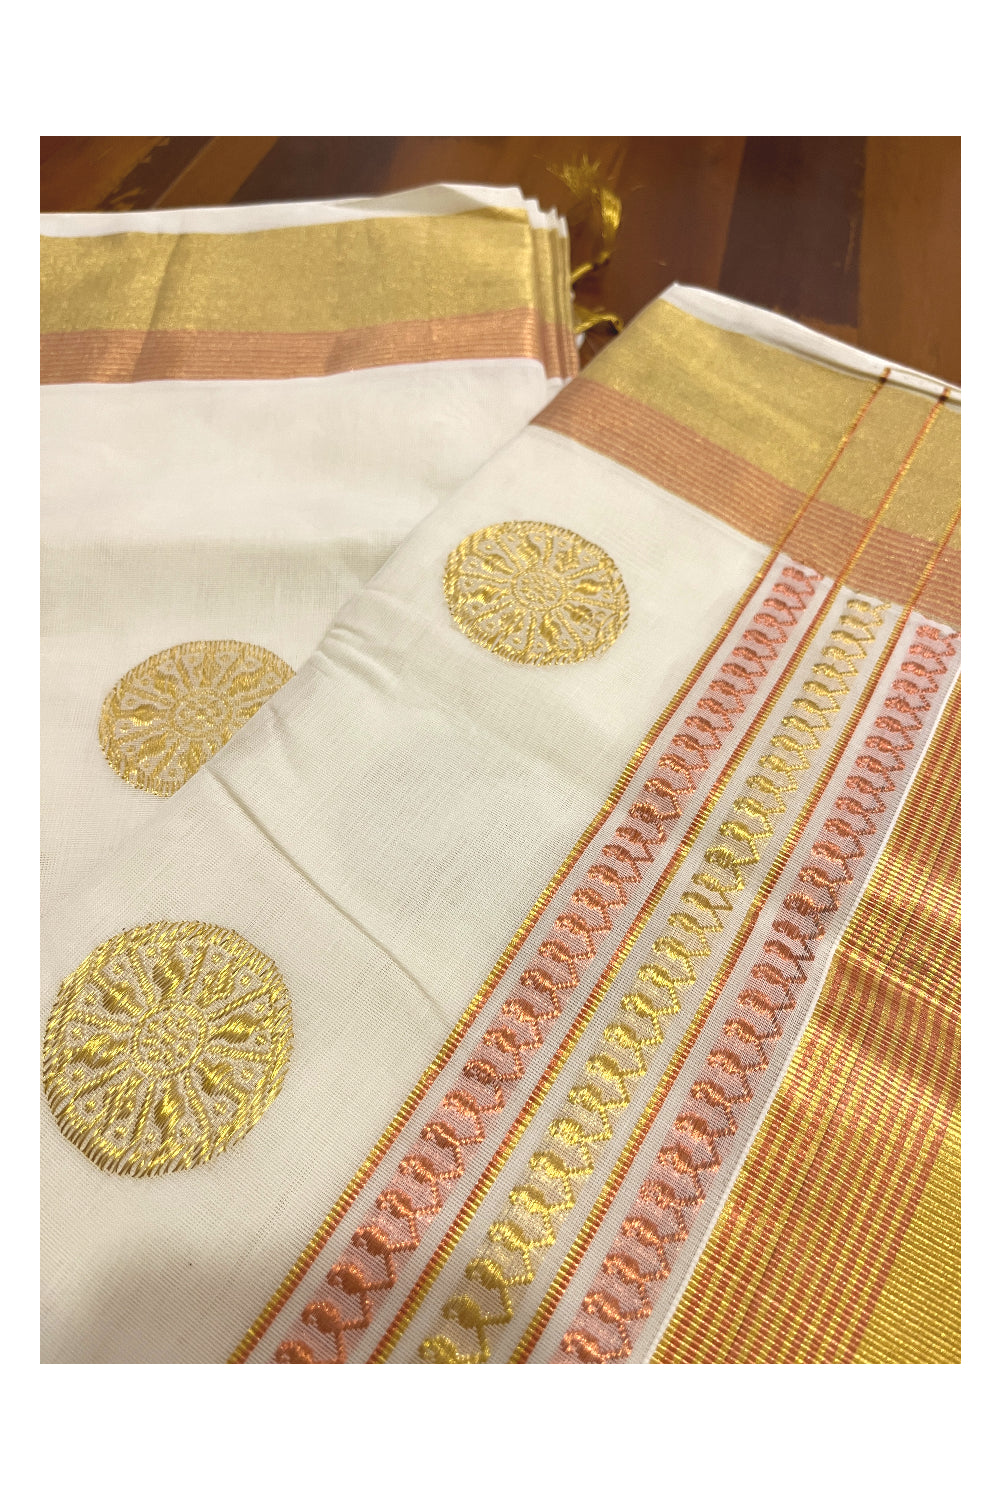 Southloom Premium Handloom Cotton Golden and Copper Kasavu Saree with Woven Designs on Body